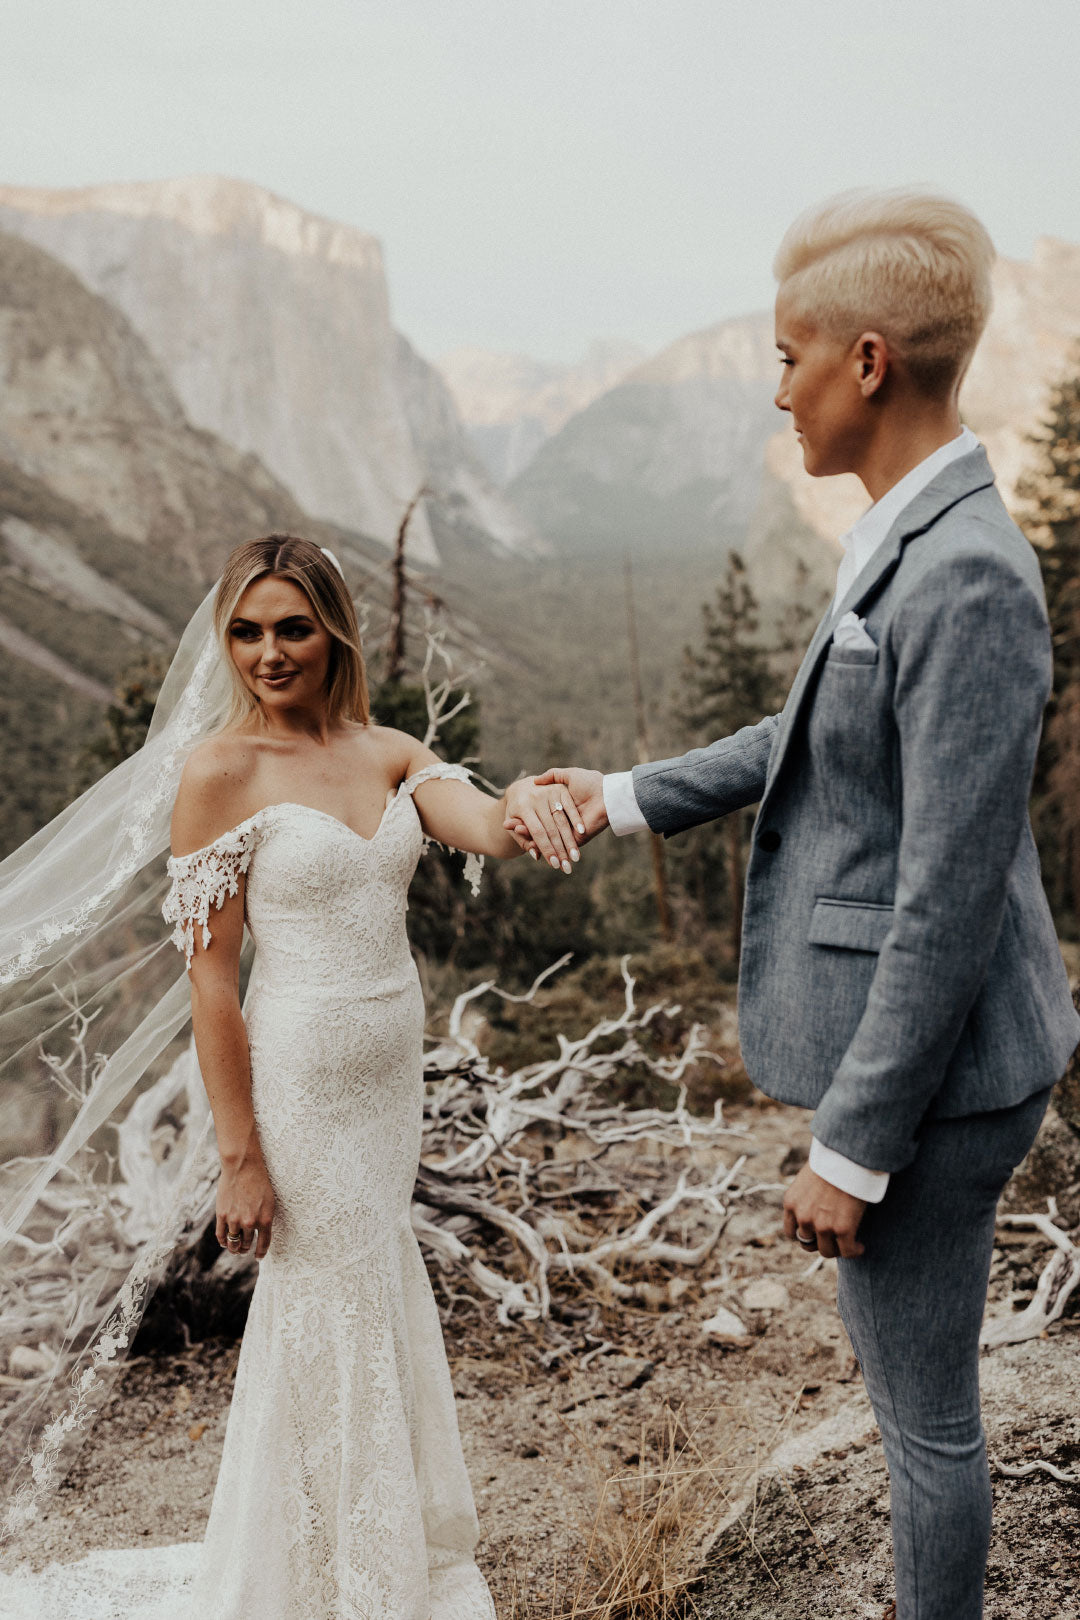 Epic Wedding Forest Picture with Trees and Couple